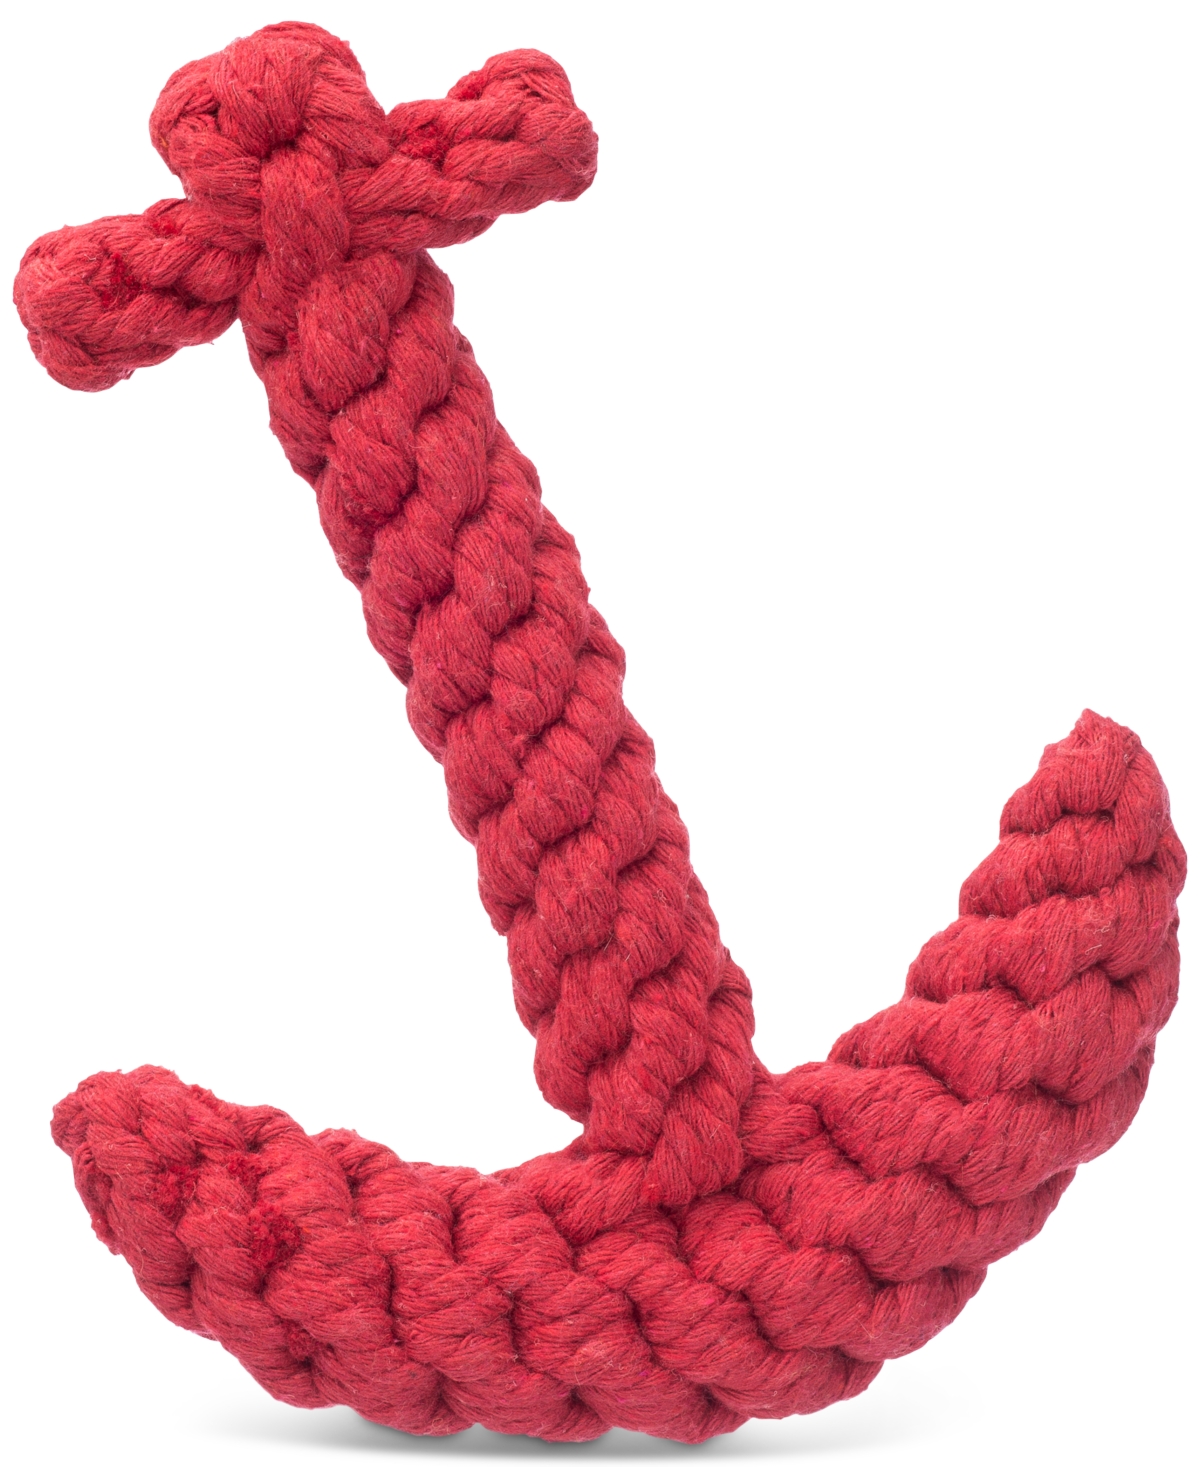 Anchor Rope Dog Toy, Red - Red